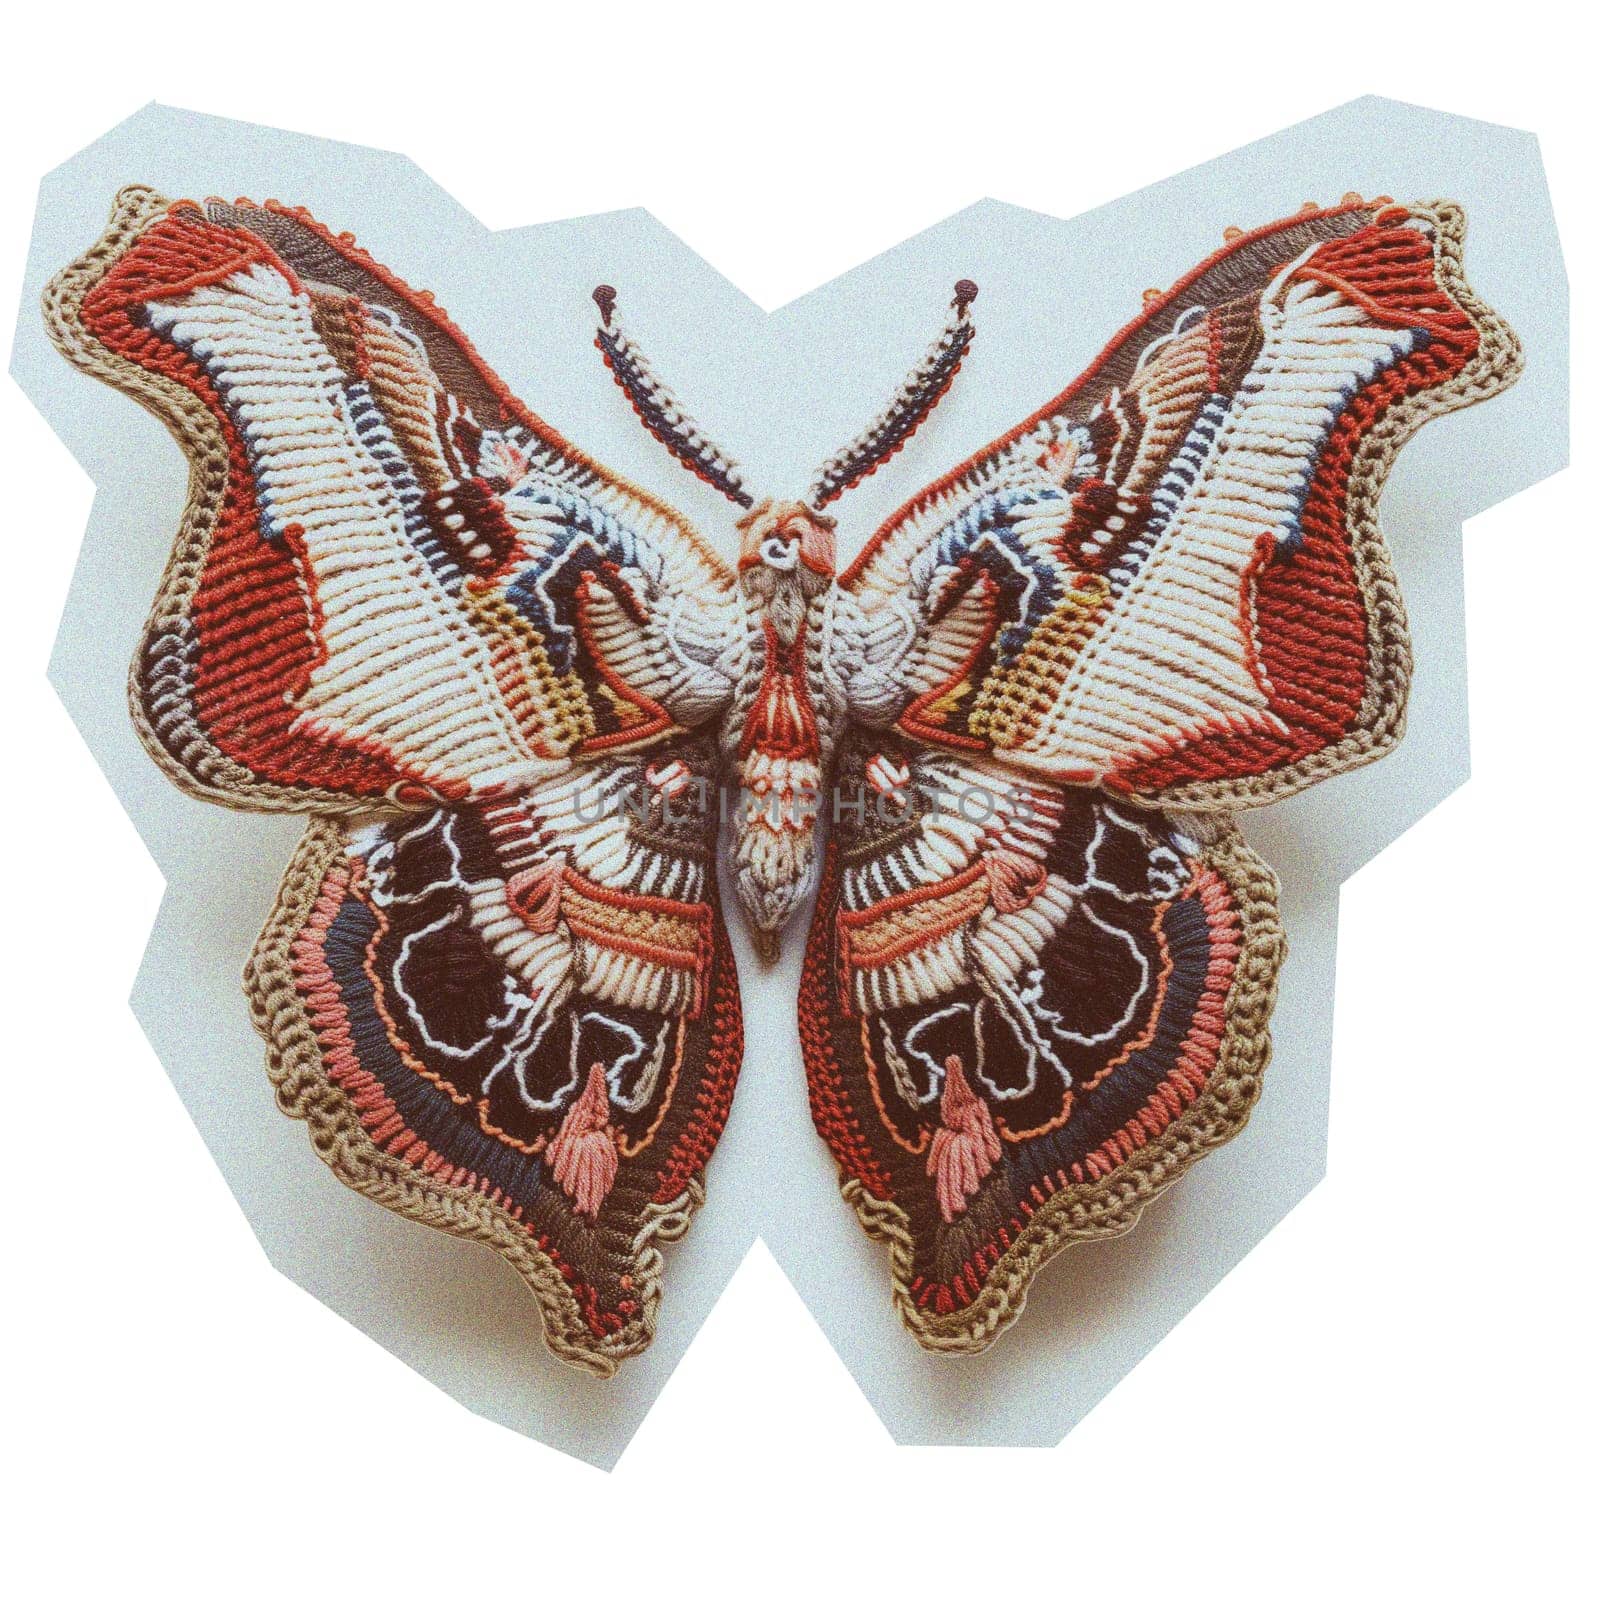 Knitted butterfly with a colorful pattern by Dustick